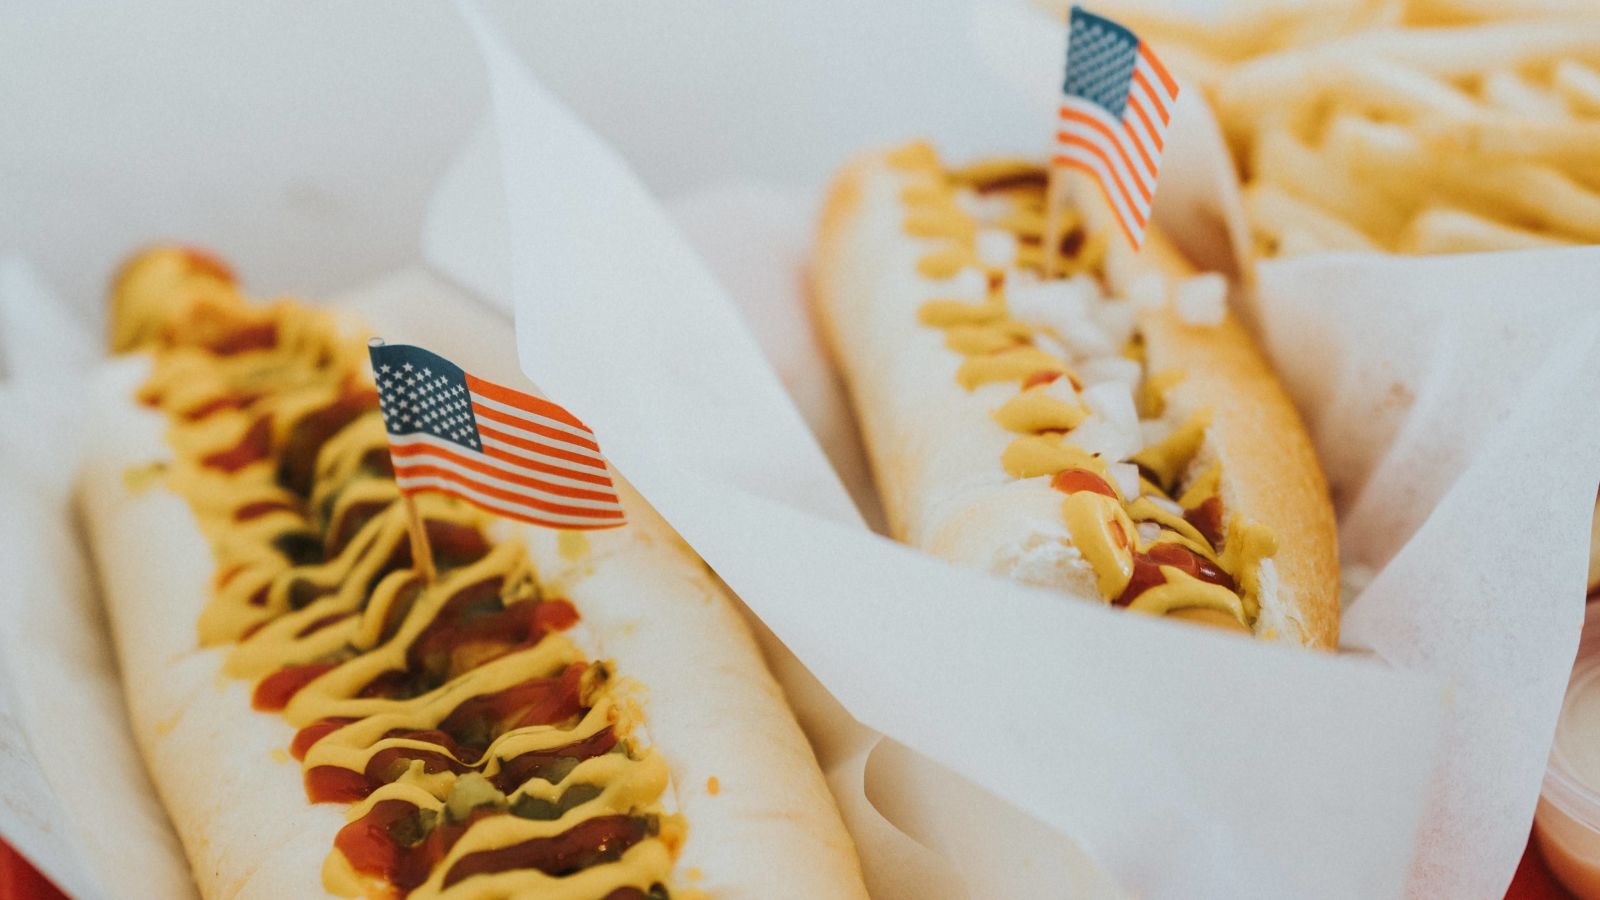 Where To Get Hot Dogs On National Dog Day